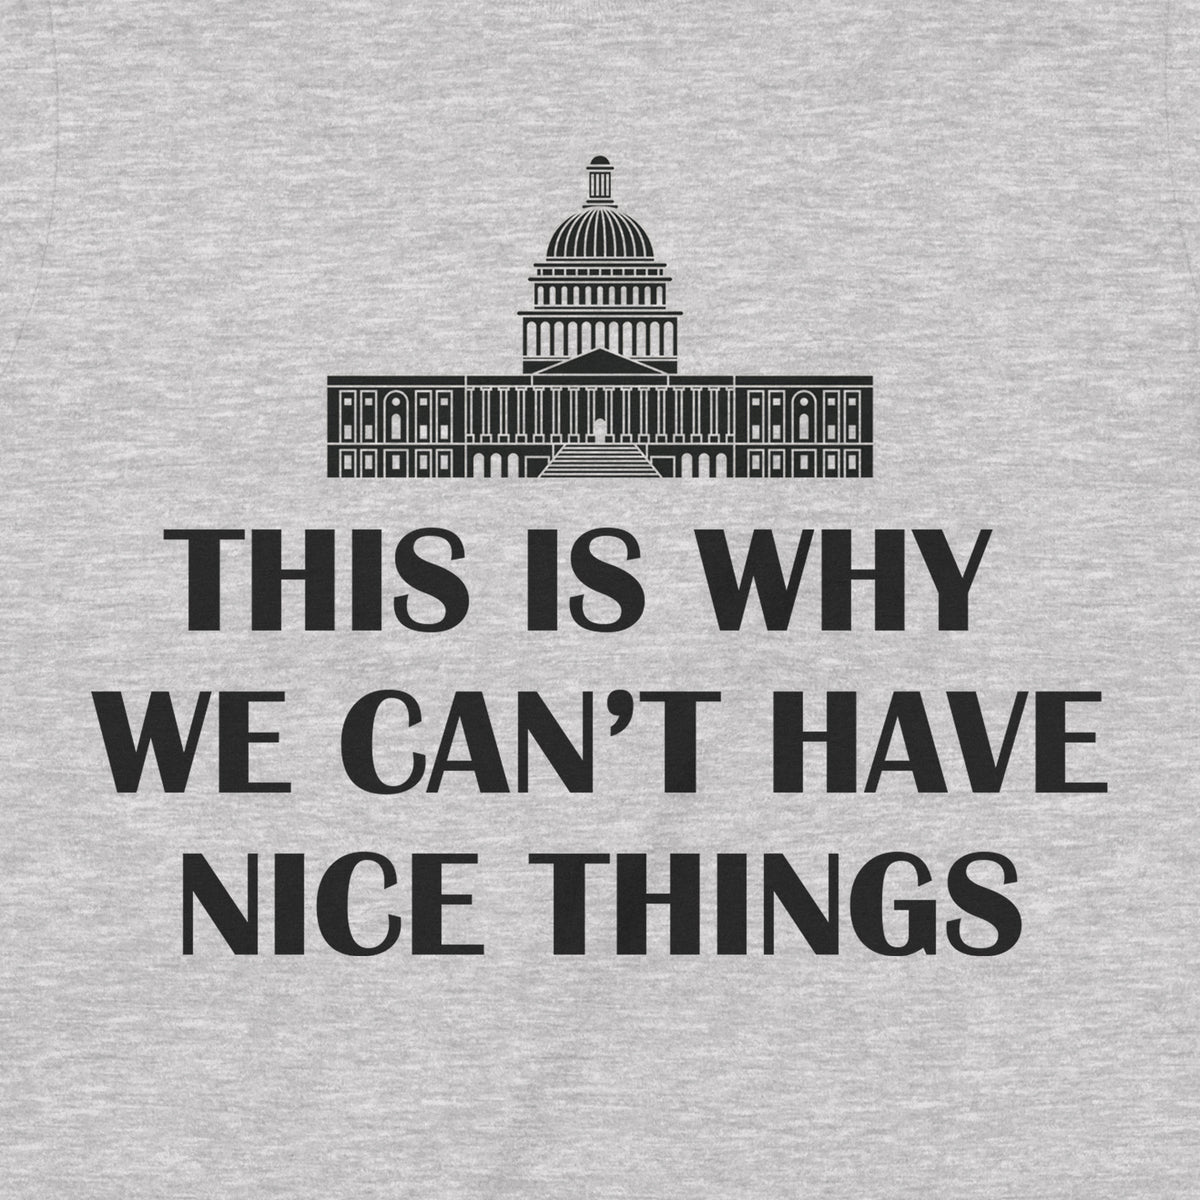 "Can't Have Nice Things" Premium Midweight Ringspun Cotton T-Shirt - Mens/Womens Fits